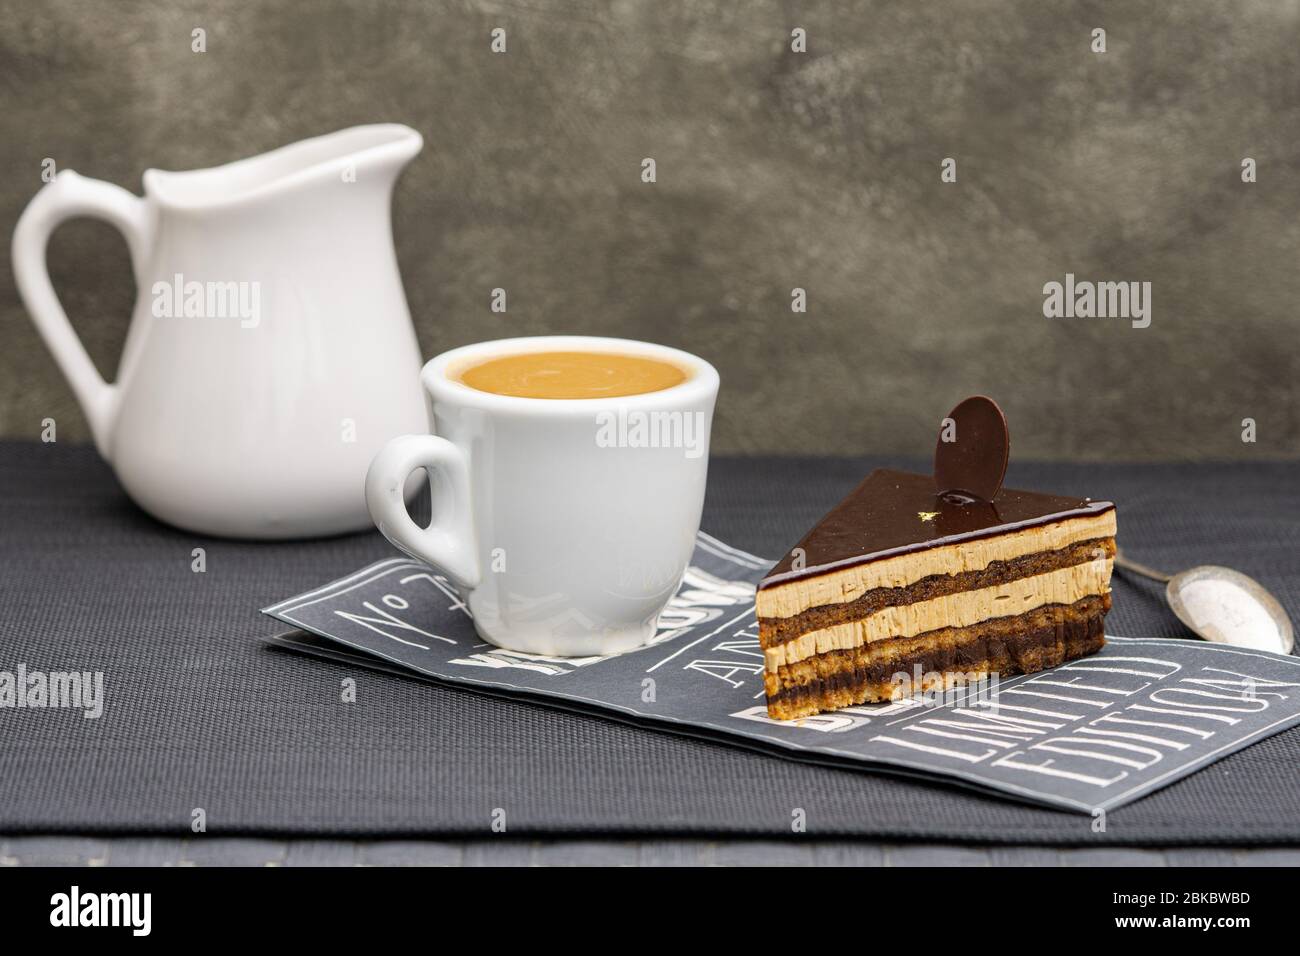 Layered chocolate opera cake with cup of espresso coffee. Copy space. Stock Photo